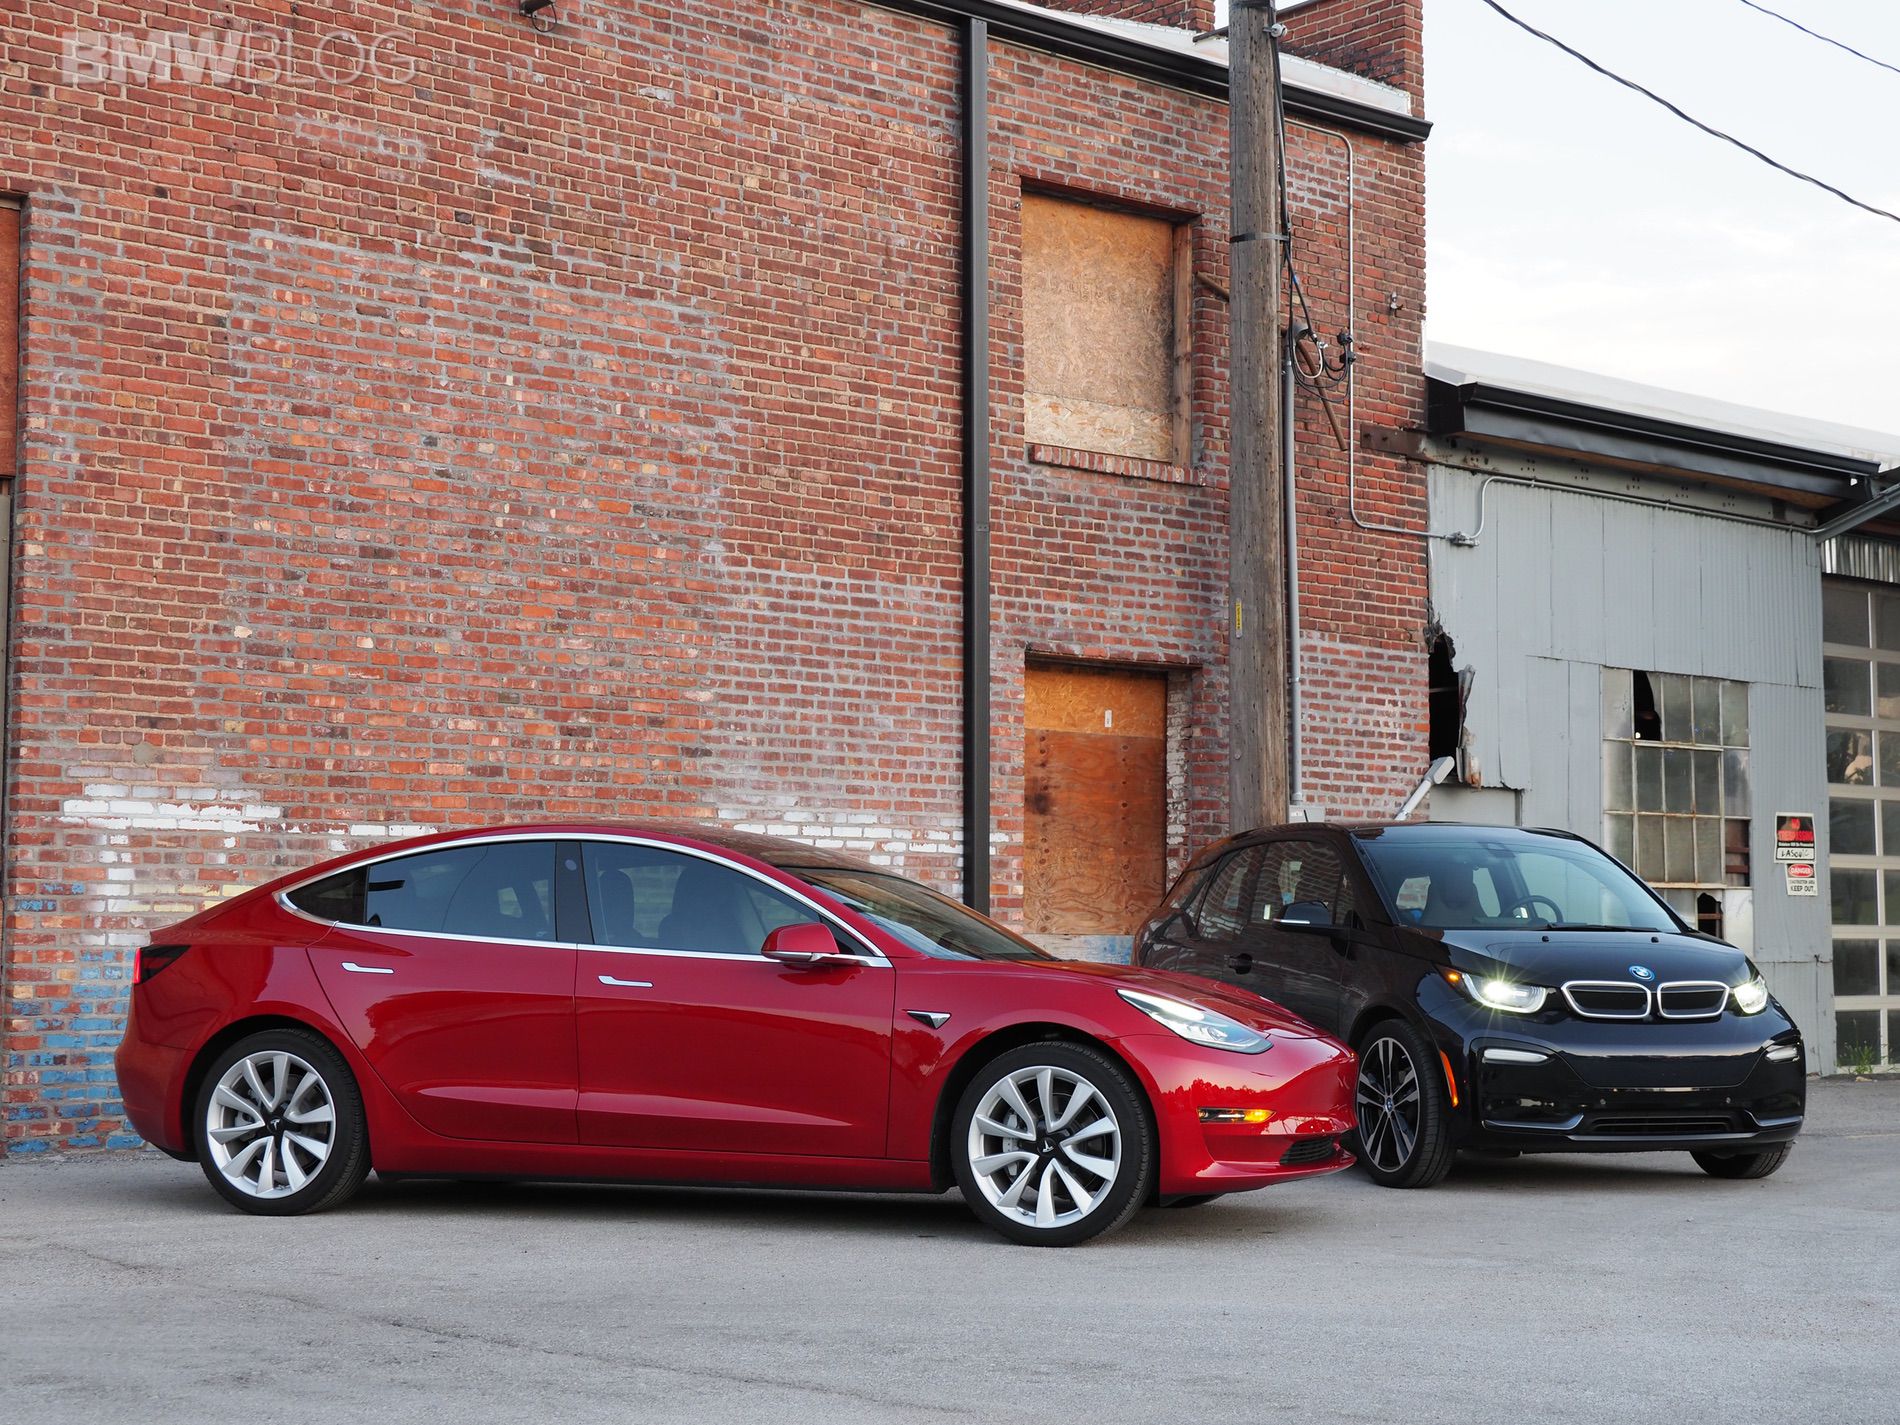 Tesla Model 3 Owners Love Their Cars — BMW Should be Worried